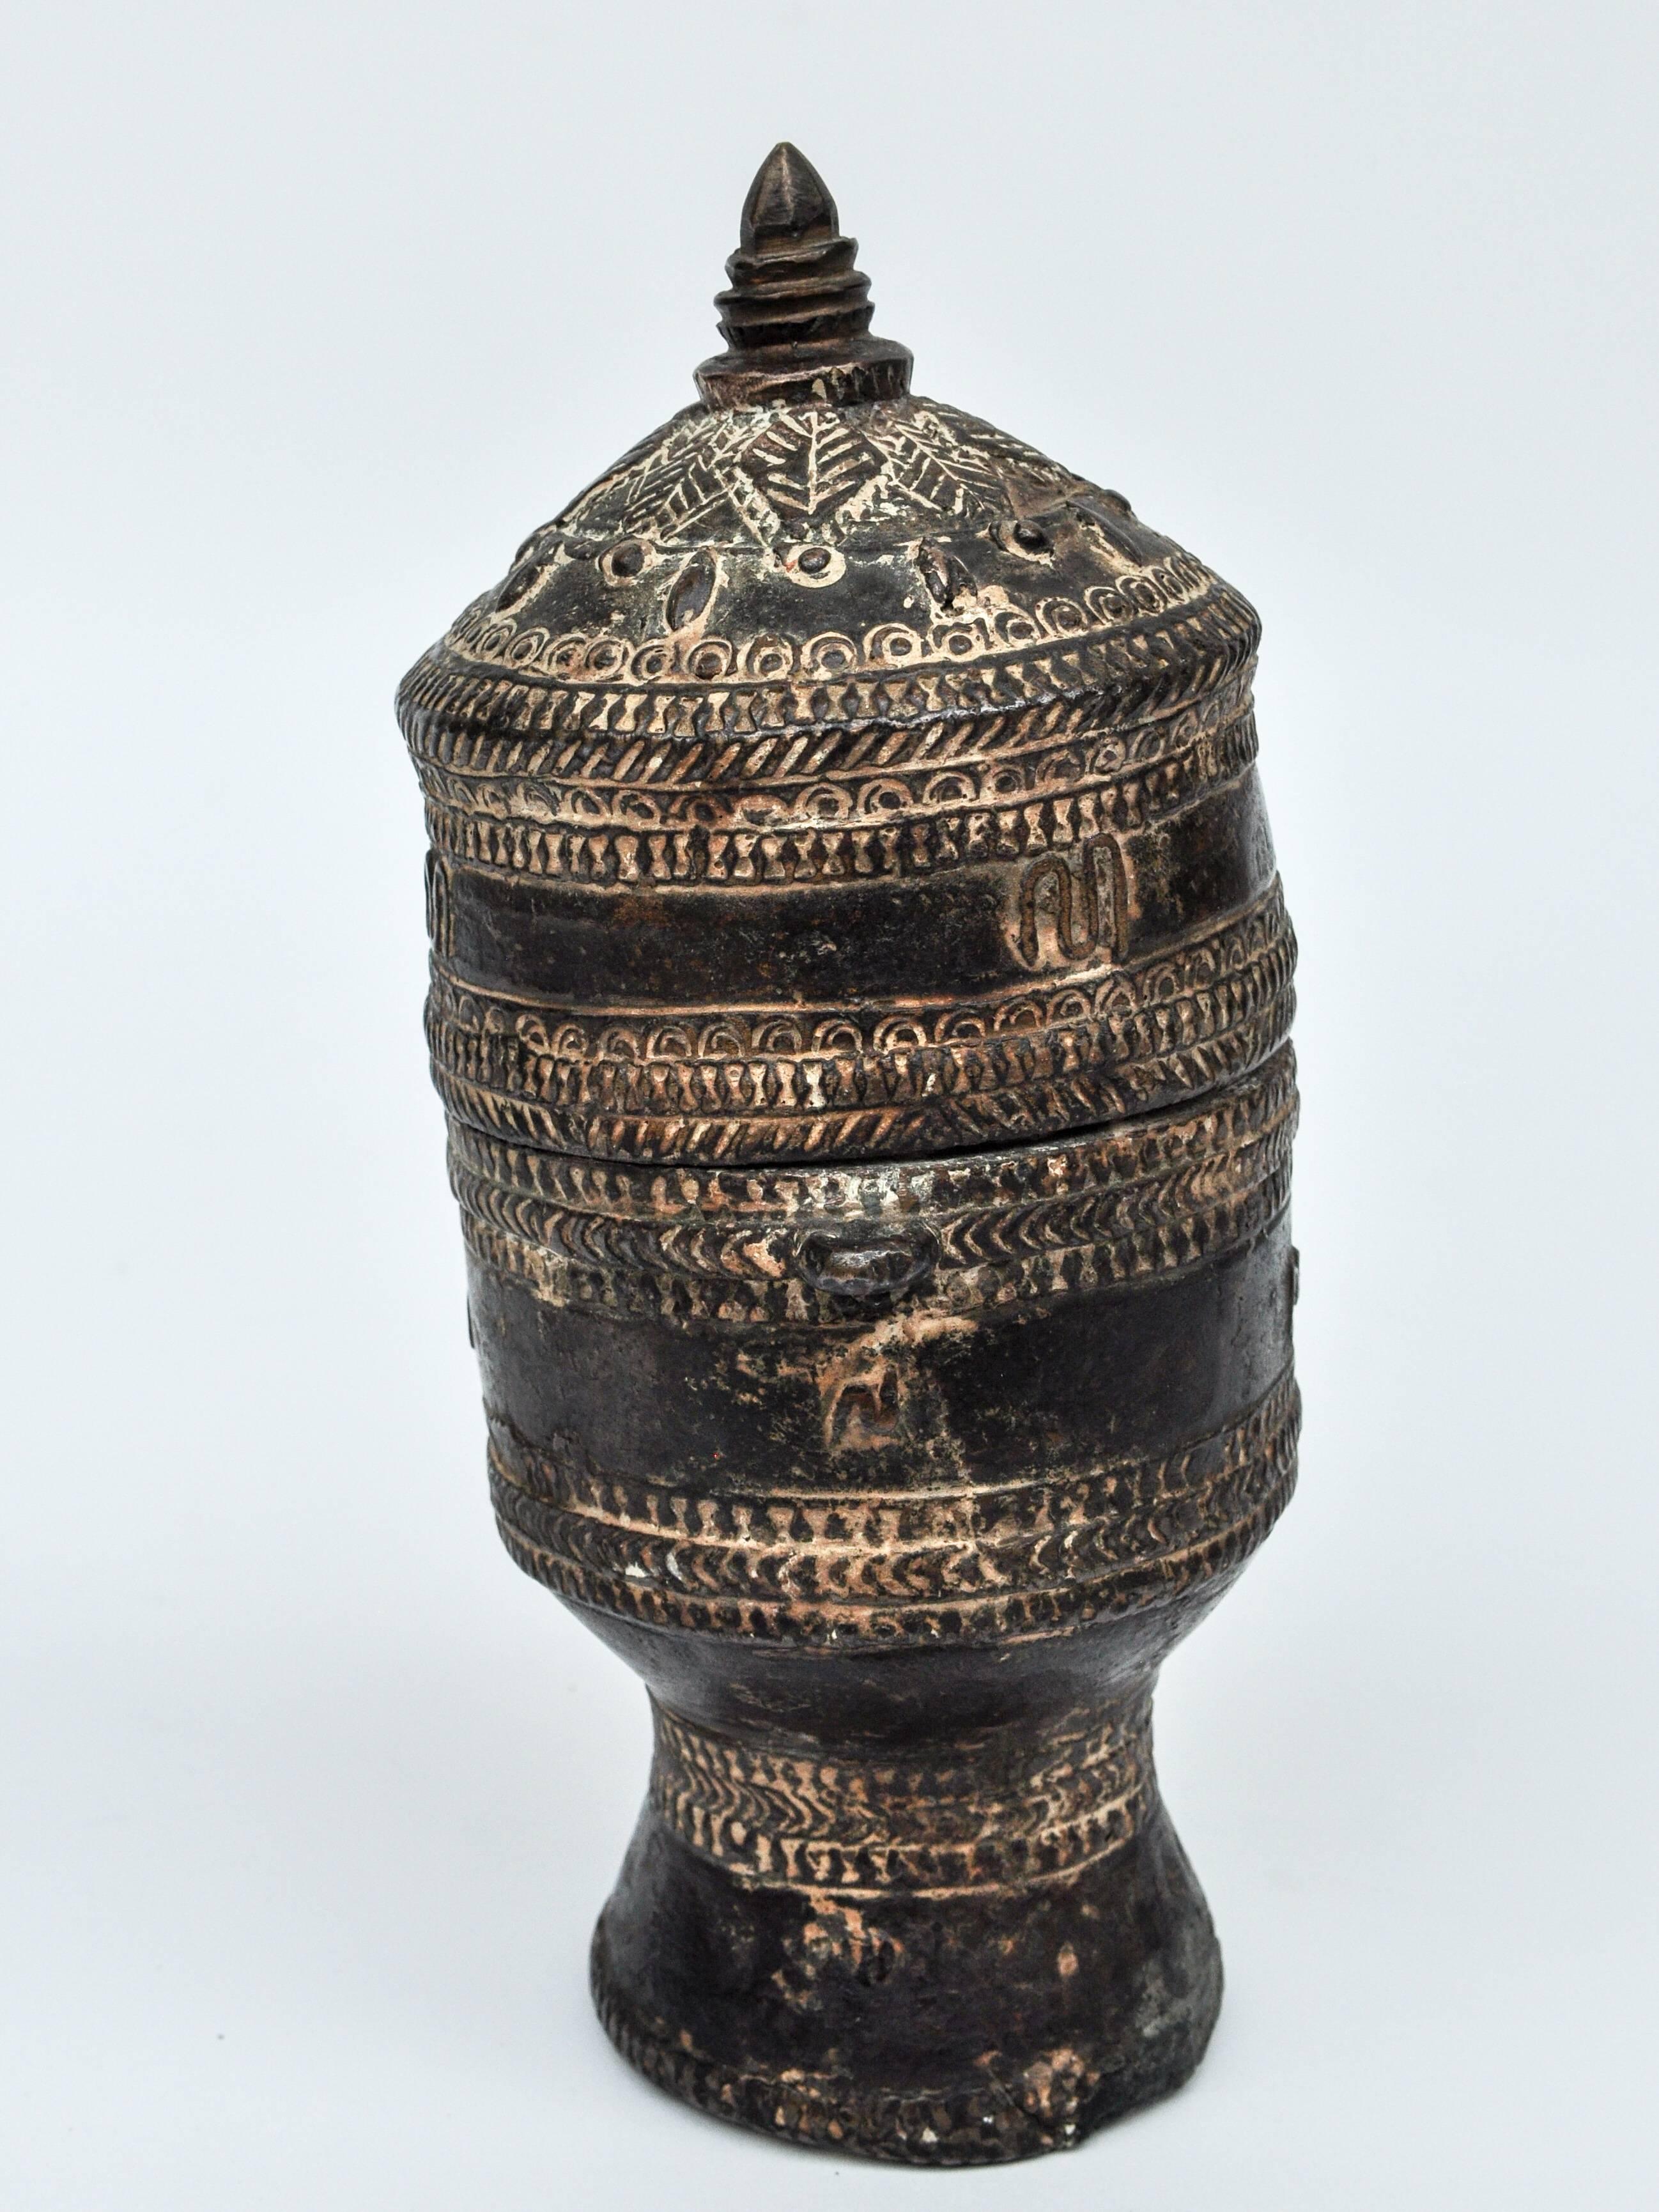 Tribal Bronze Lime Container from Laos, Mid-20th Century